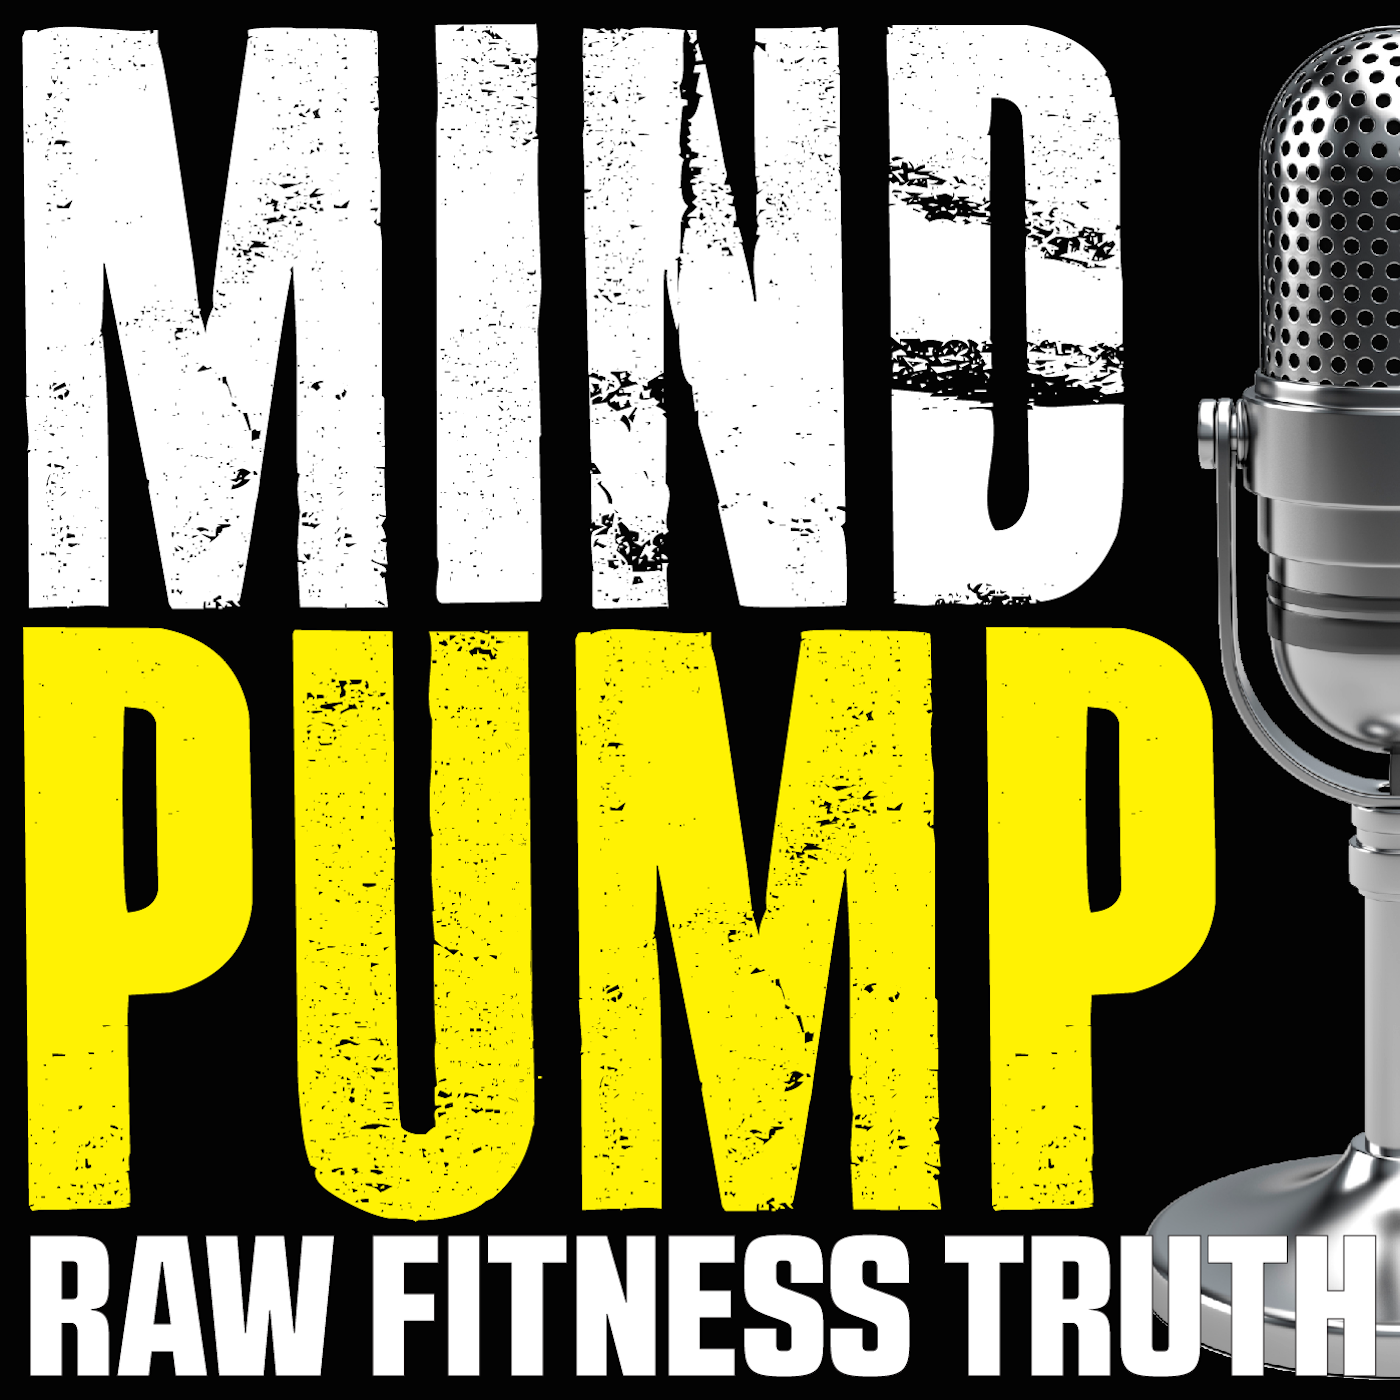 051: Milk for Babies… BFR & Triggering for Muscle